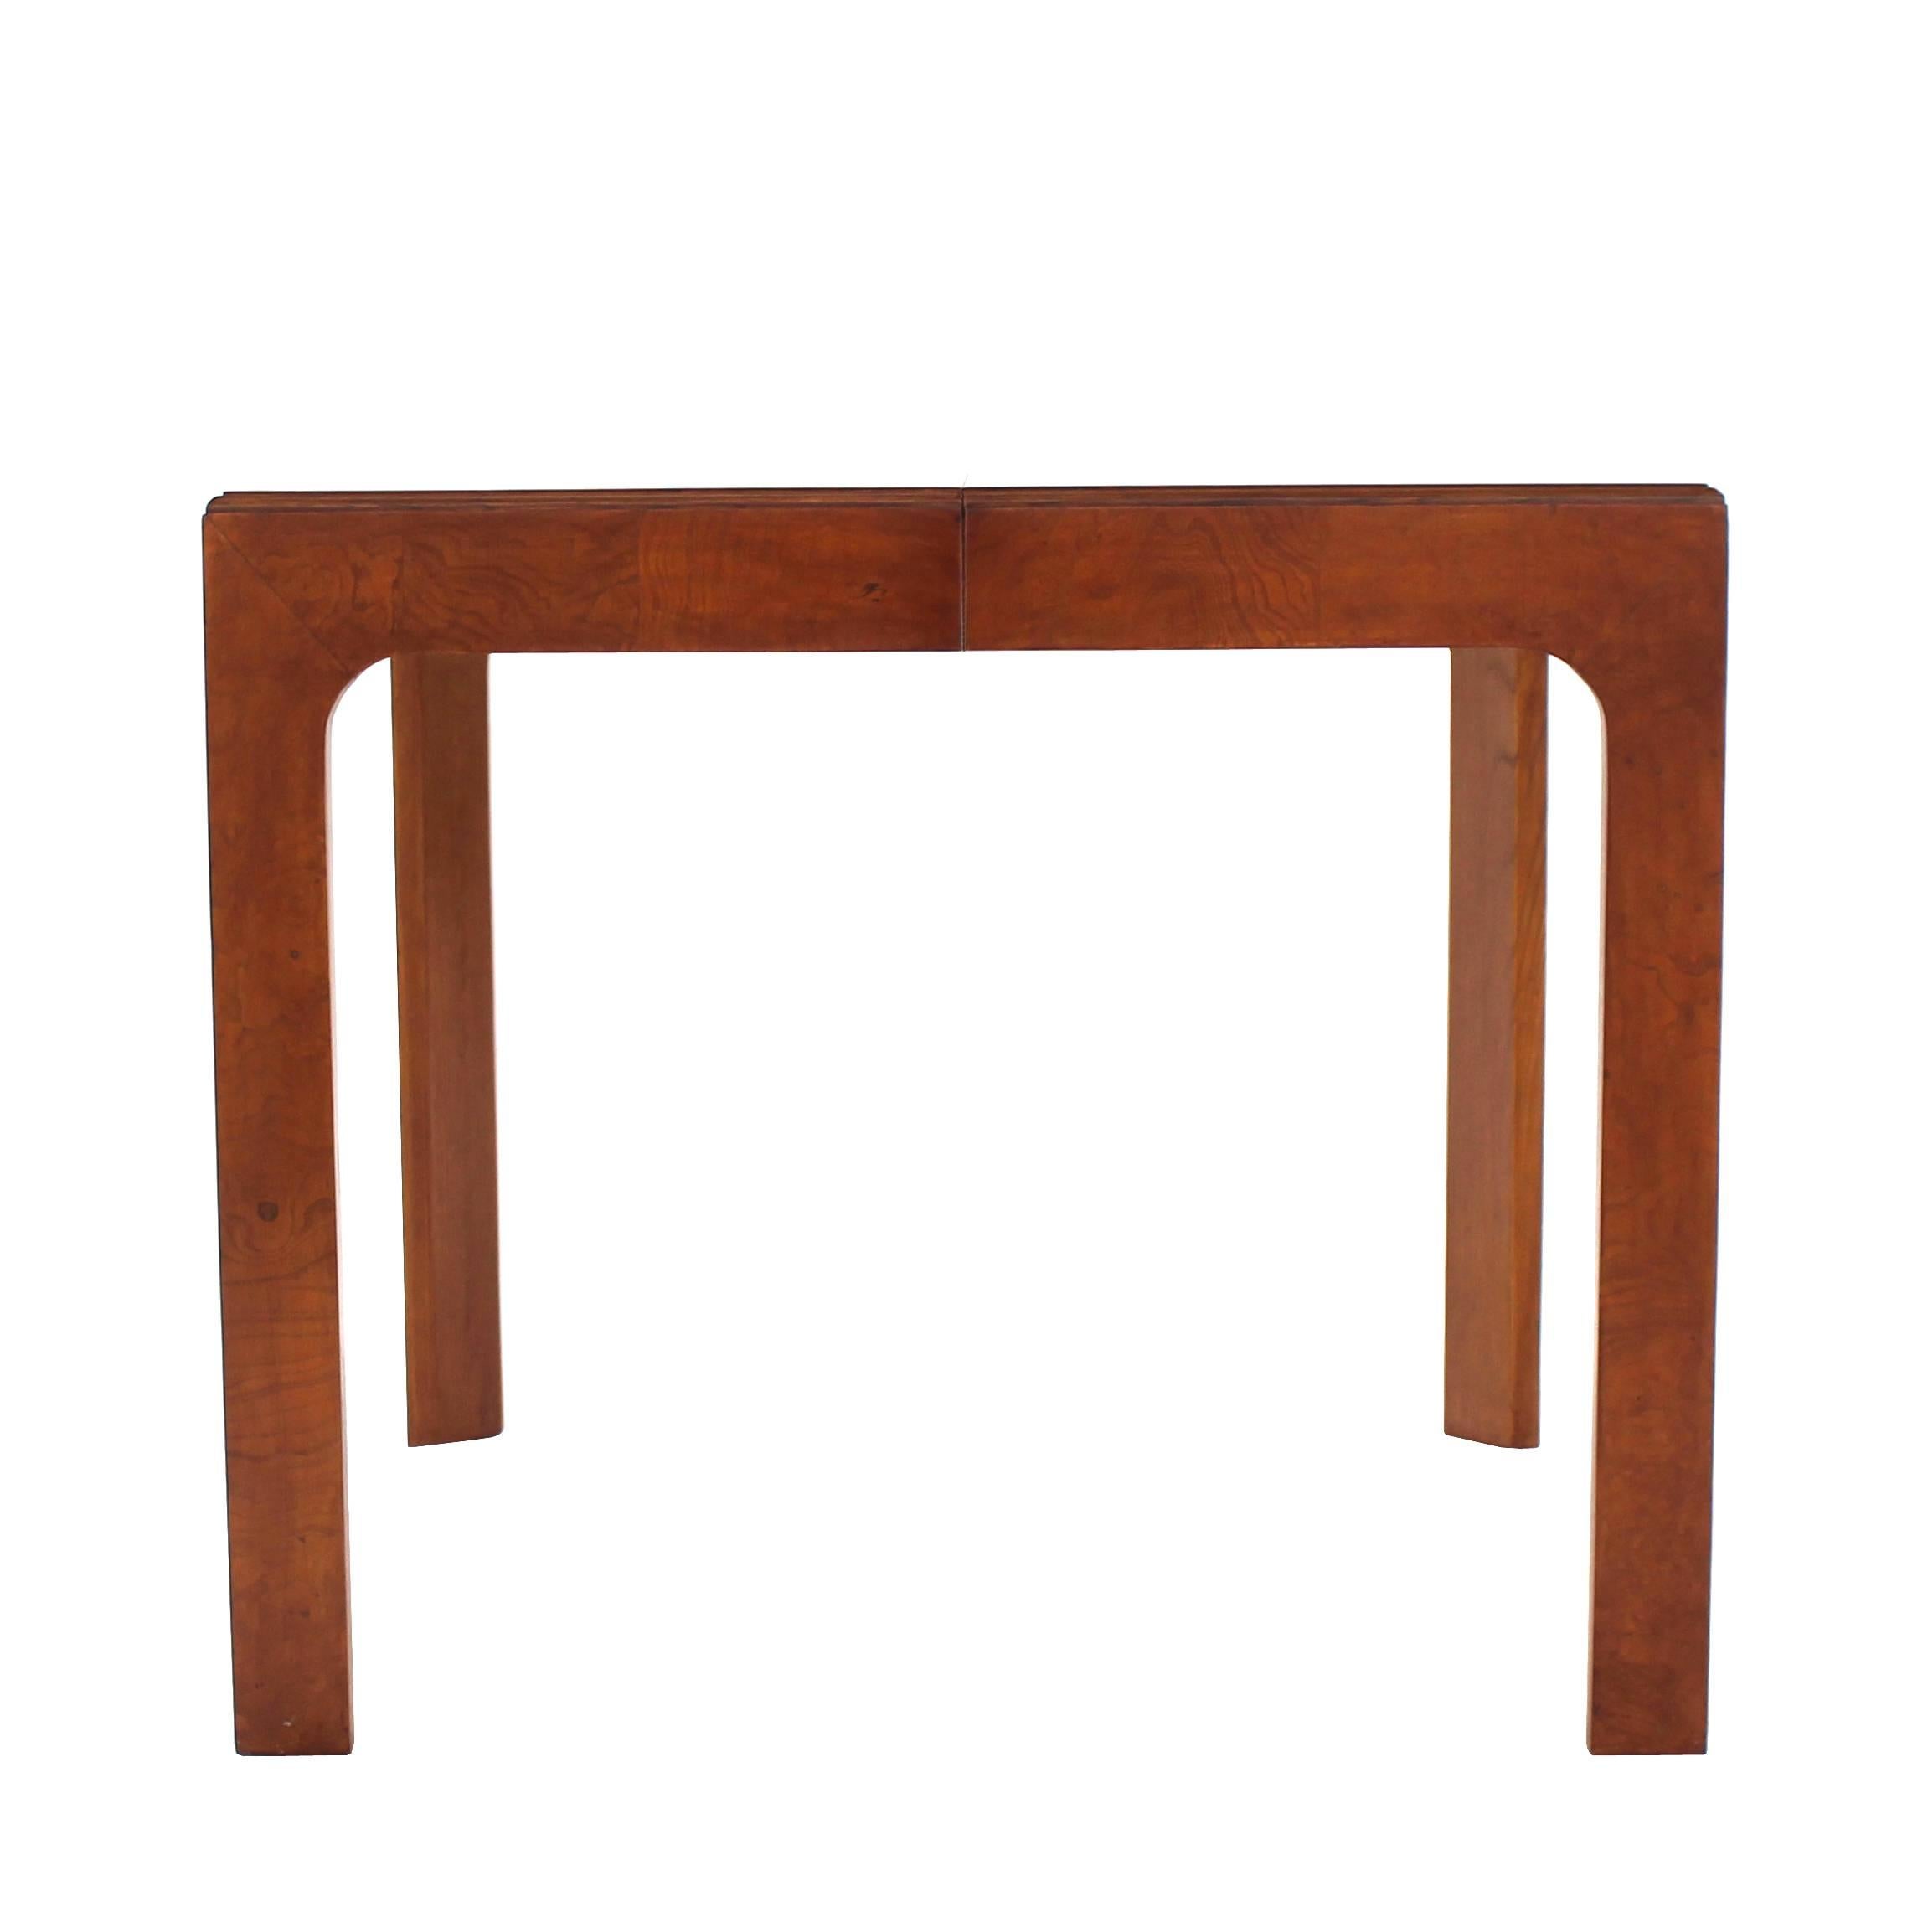 American Henredon Square Dining Table with One Extension Board